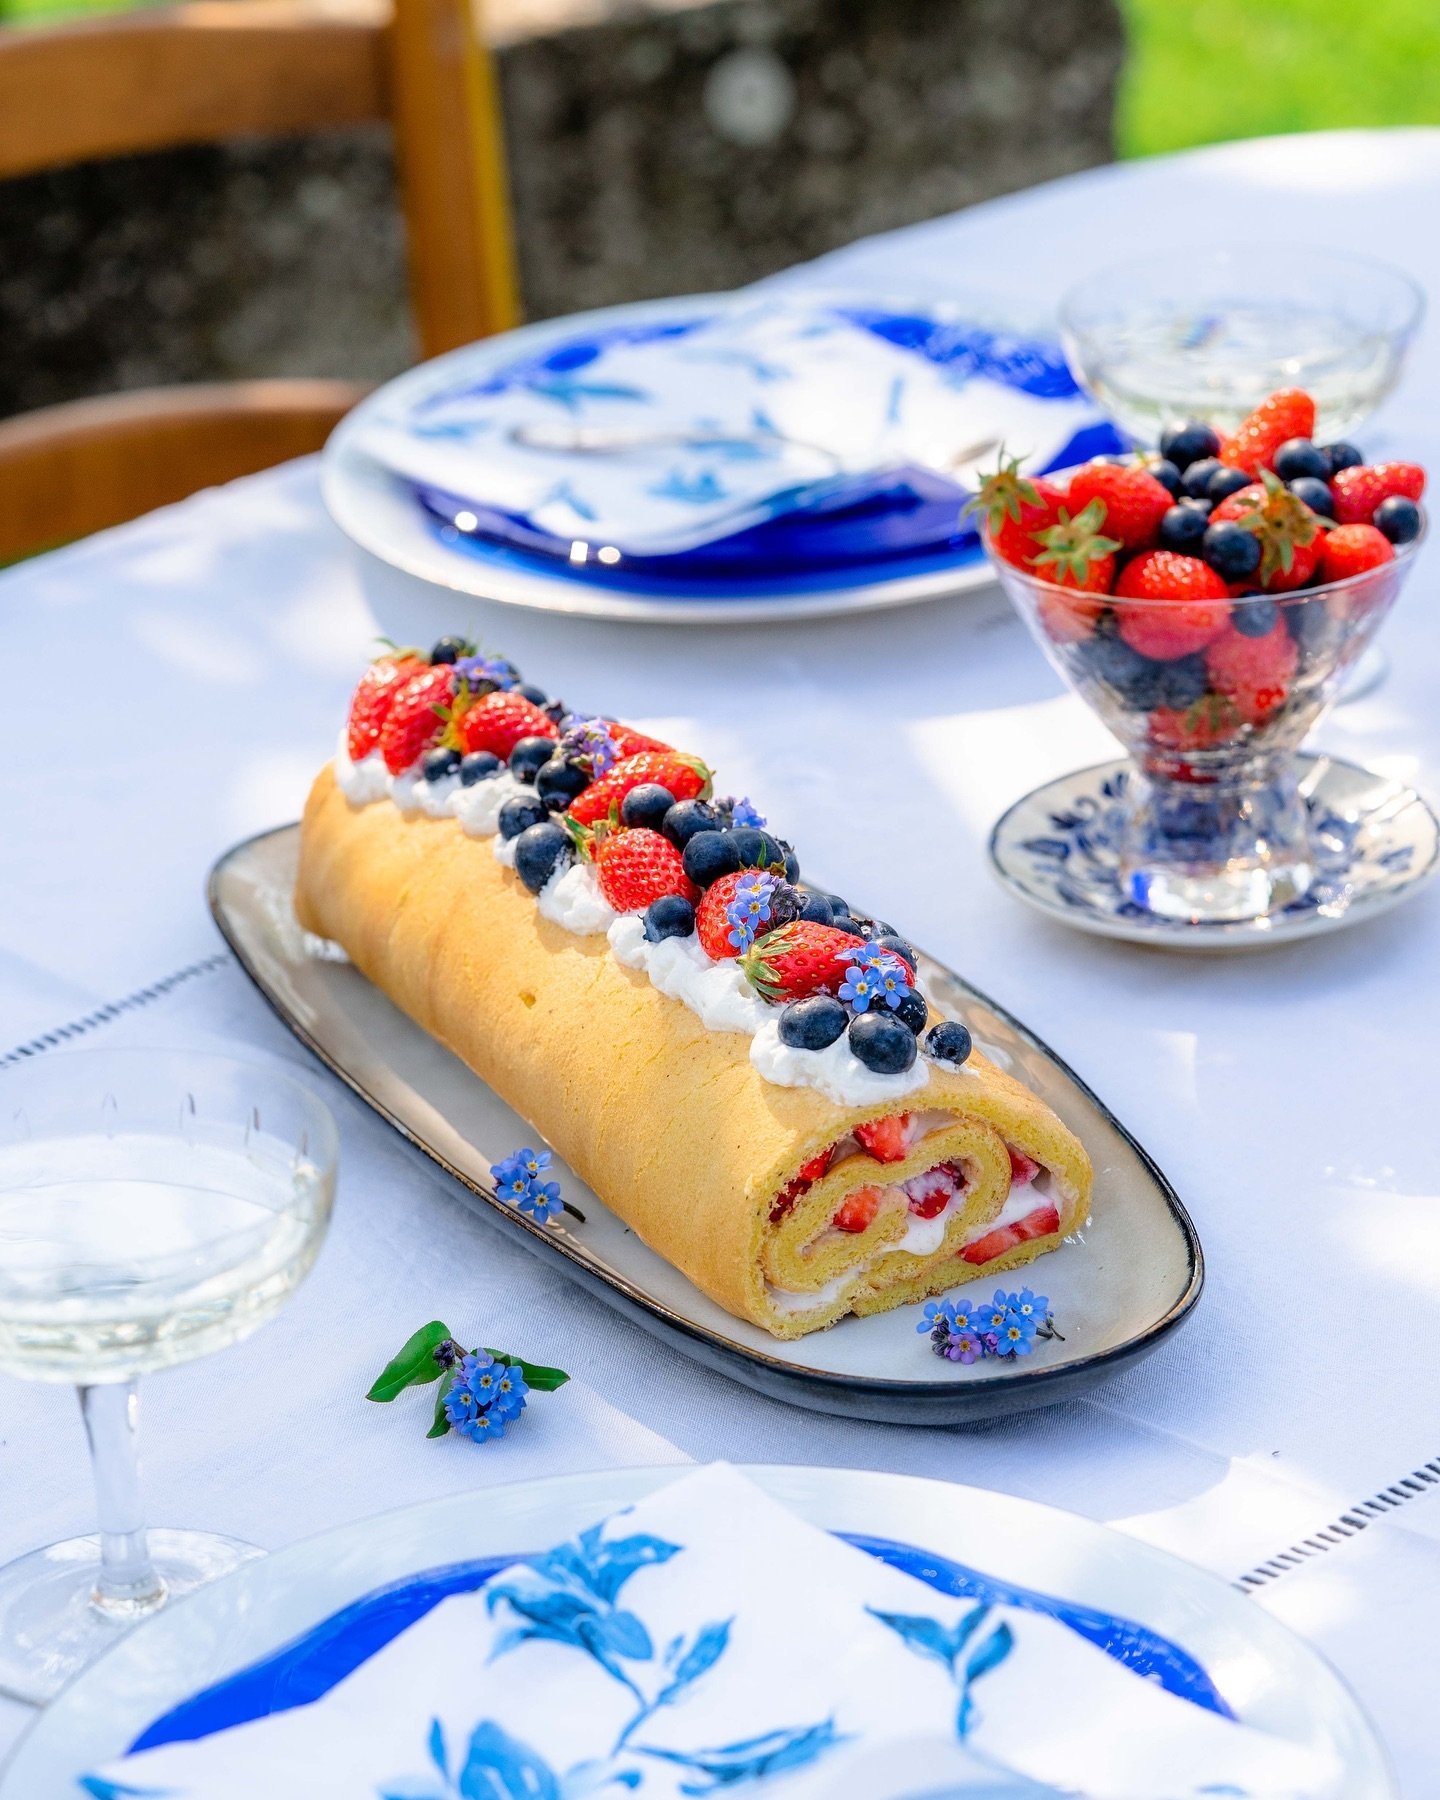 Happy 1st of May ✨ Norwegian national day is getting closer so be ready to see some red, white &amp; blue colors on your feed these coming weeks 🤩🇳🇴

I made this Swiss Roll with my mum last year, we love baking together 👩🏻&zwj;🍳 I have eaten th